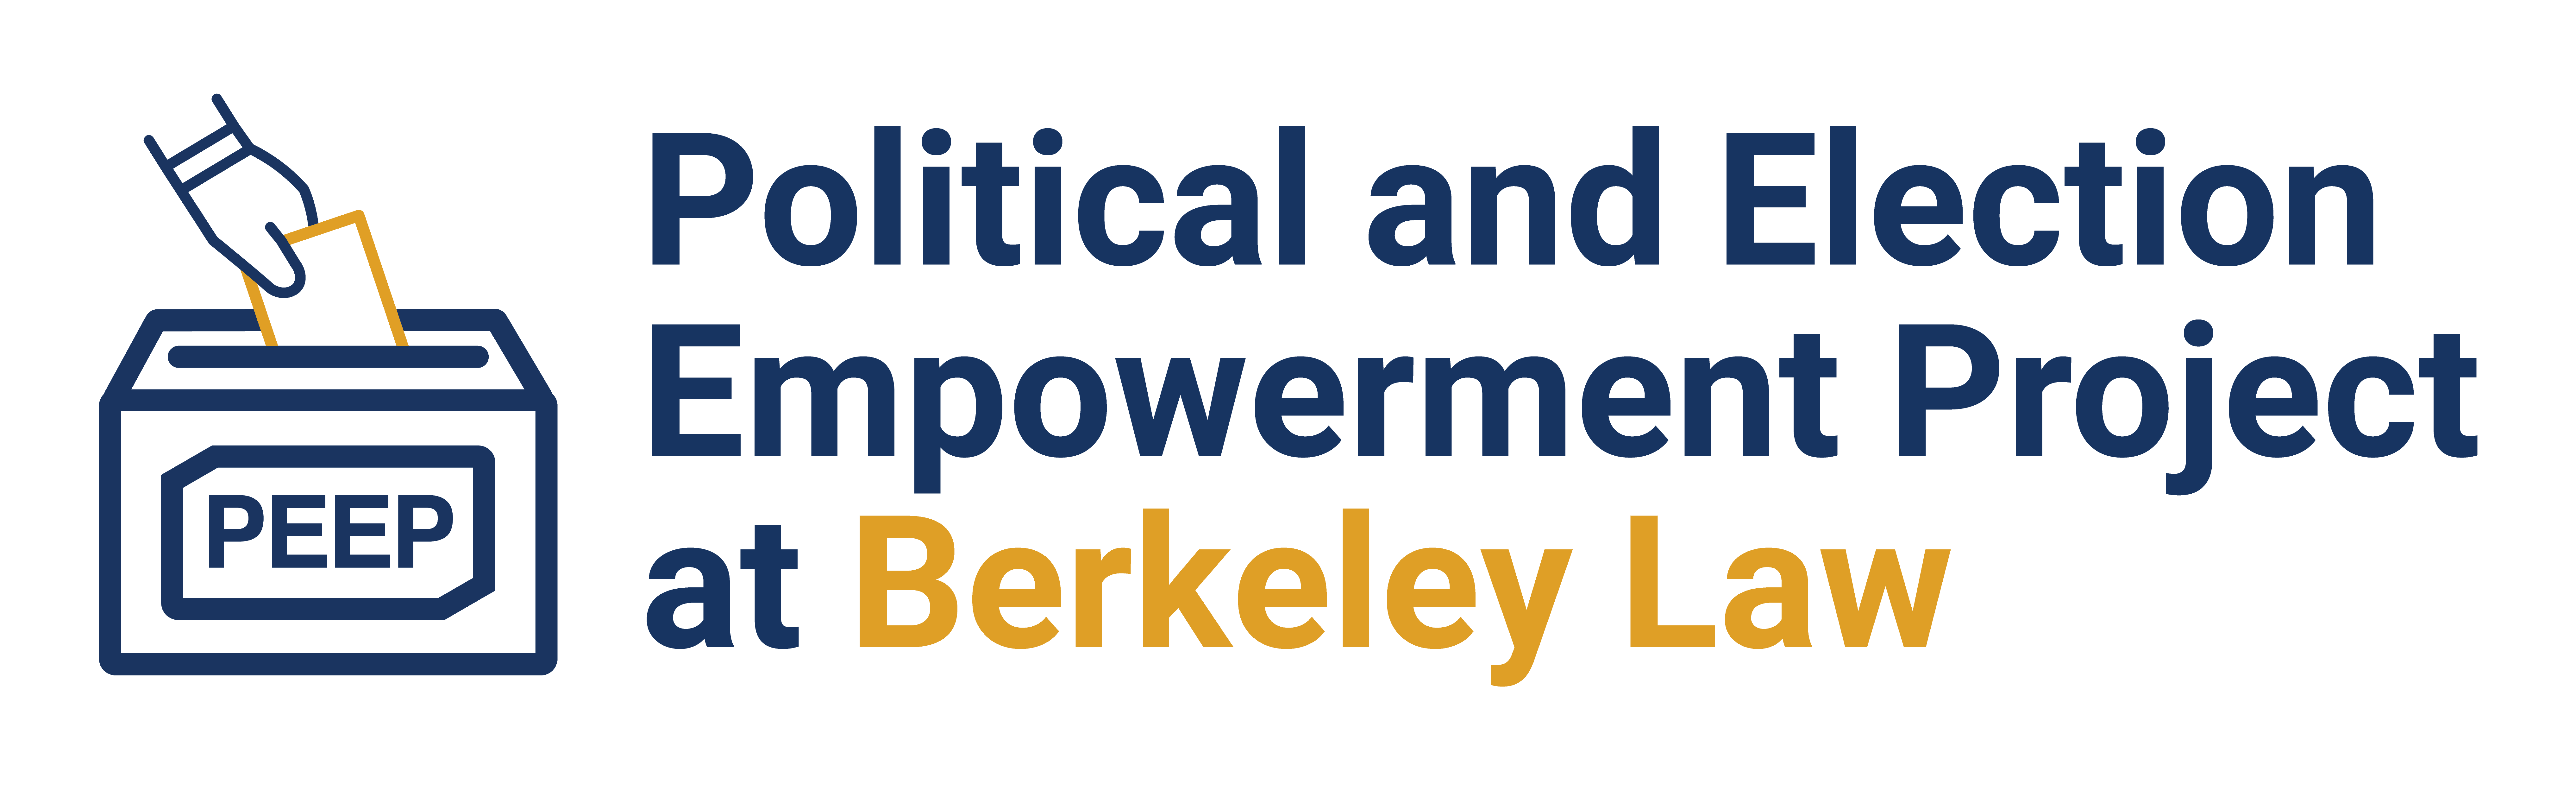 PEEP (Political and Election Empowerment Project at Berkeley Law) SLP Logo with a hand inserting ballot with the word "PEEP" infront.